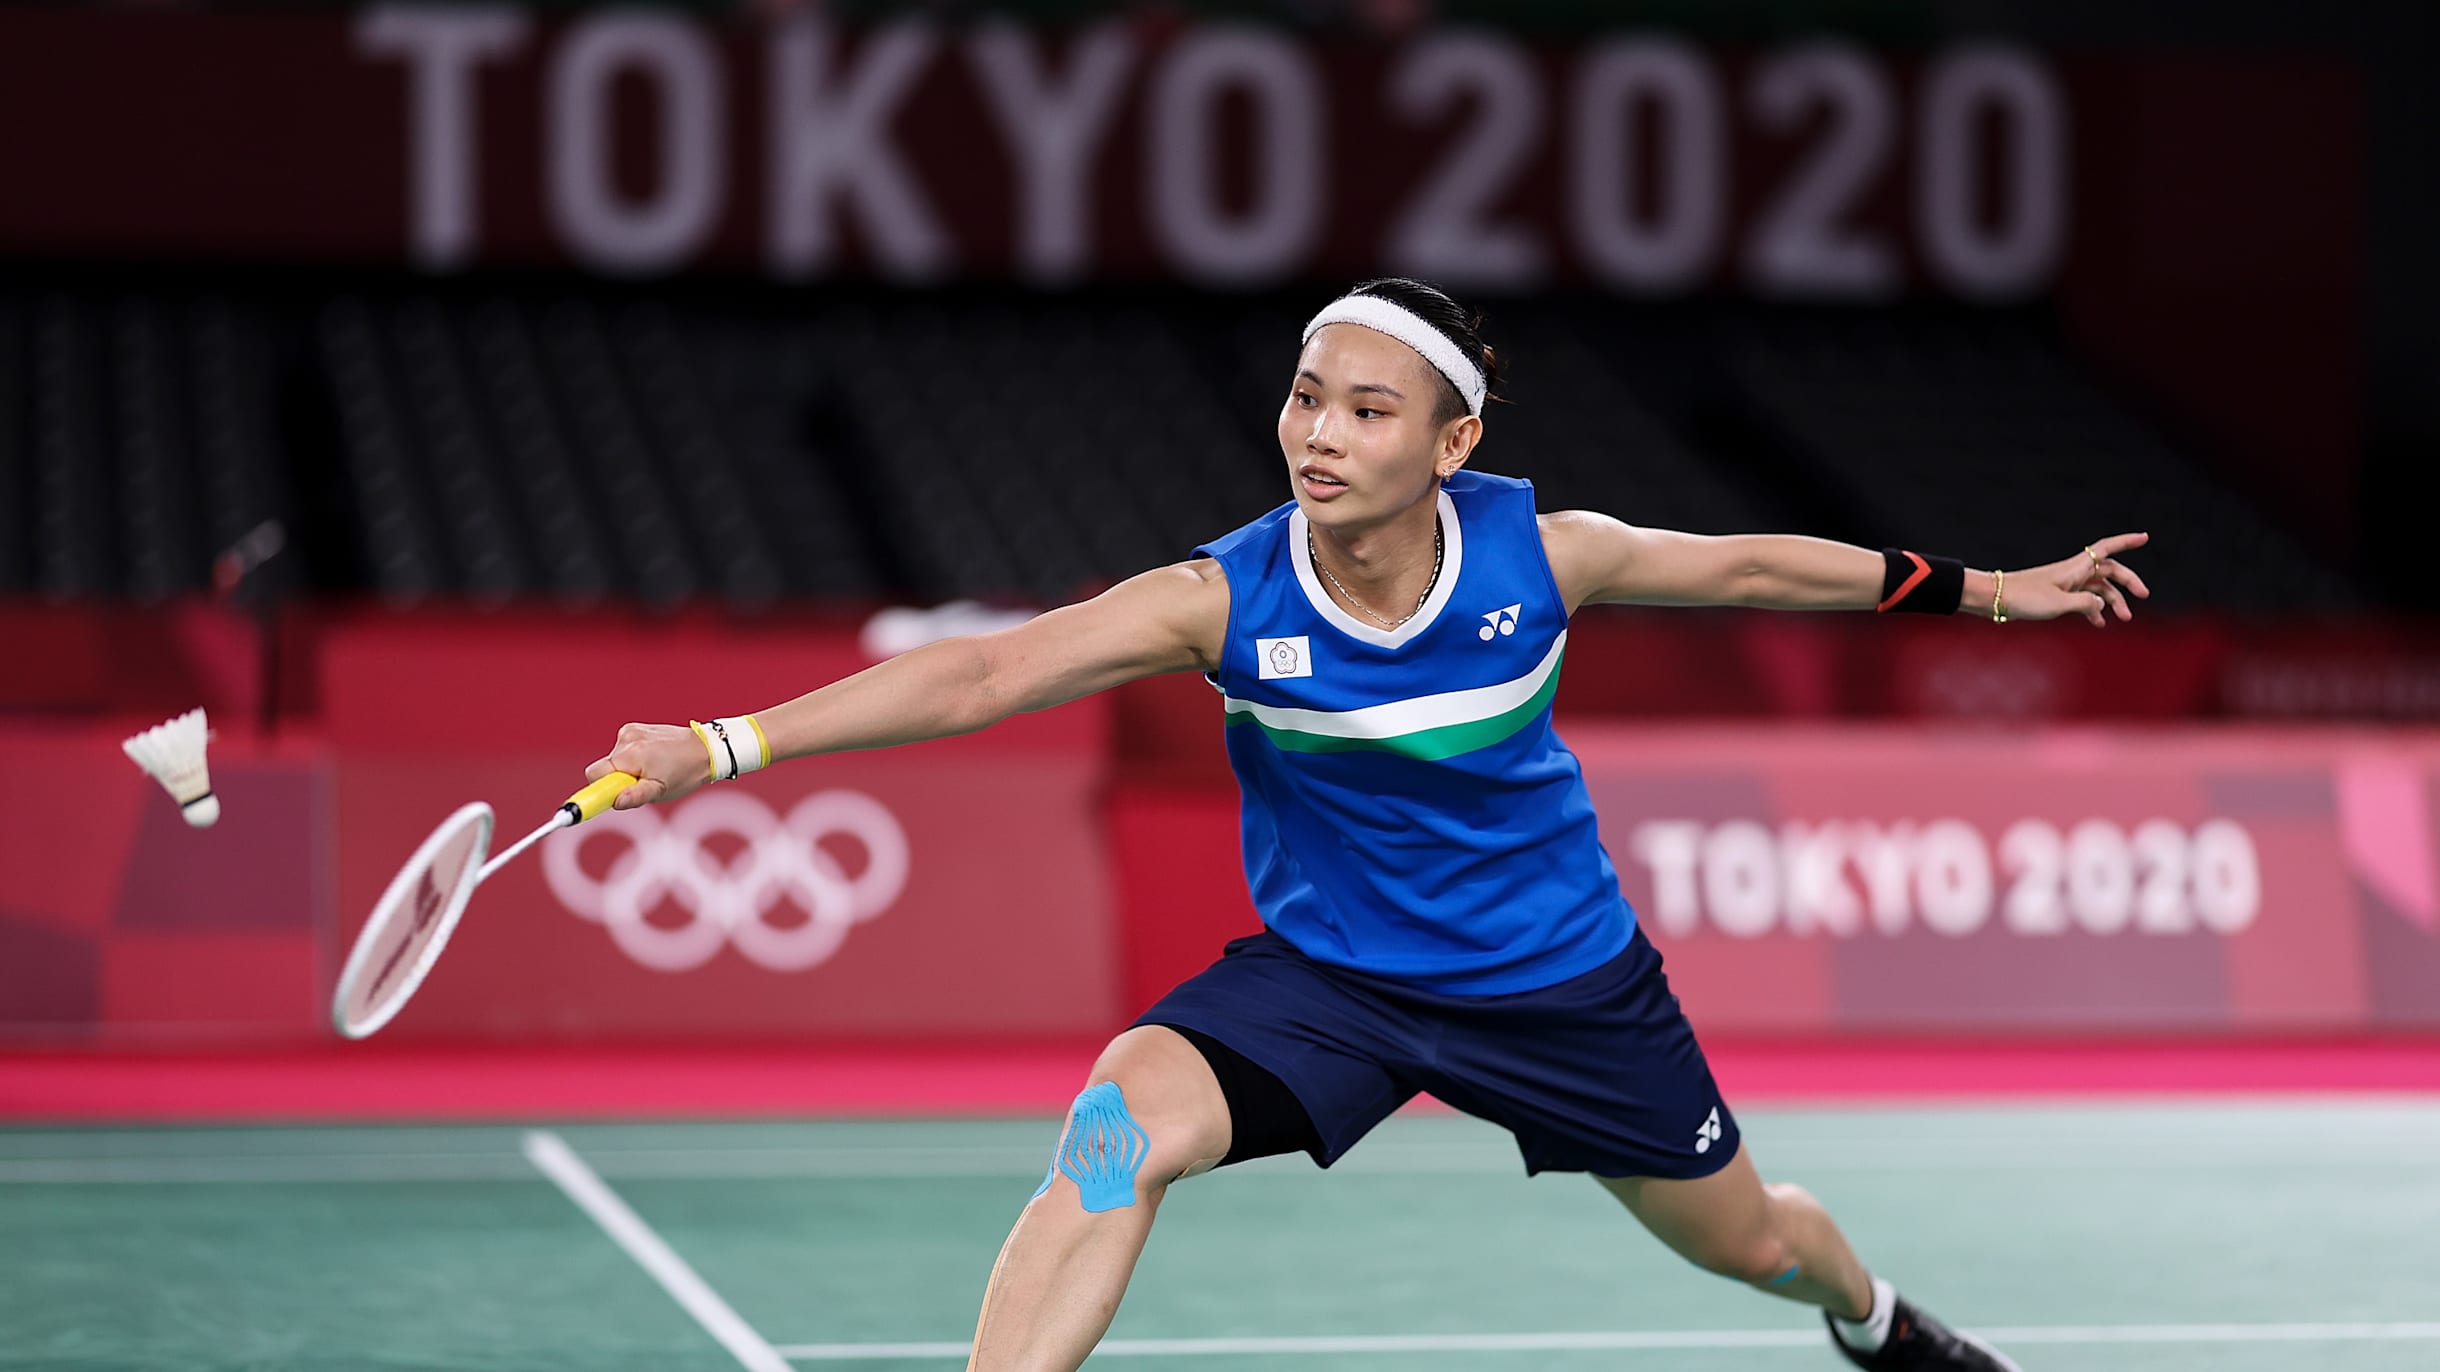 Tokyo Olympics badminton Watch Tai Tzu-ying vs Chen Yu Fei womens singles gold medal match on live streaming and TV in India